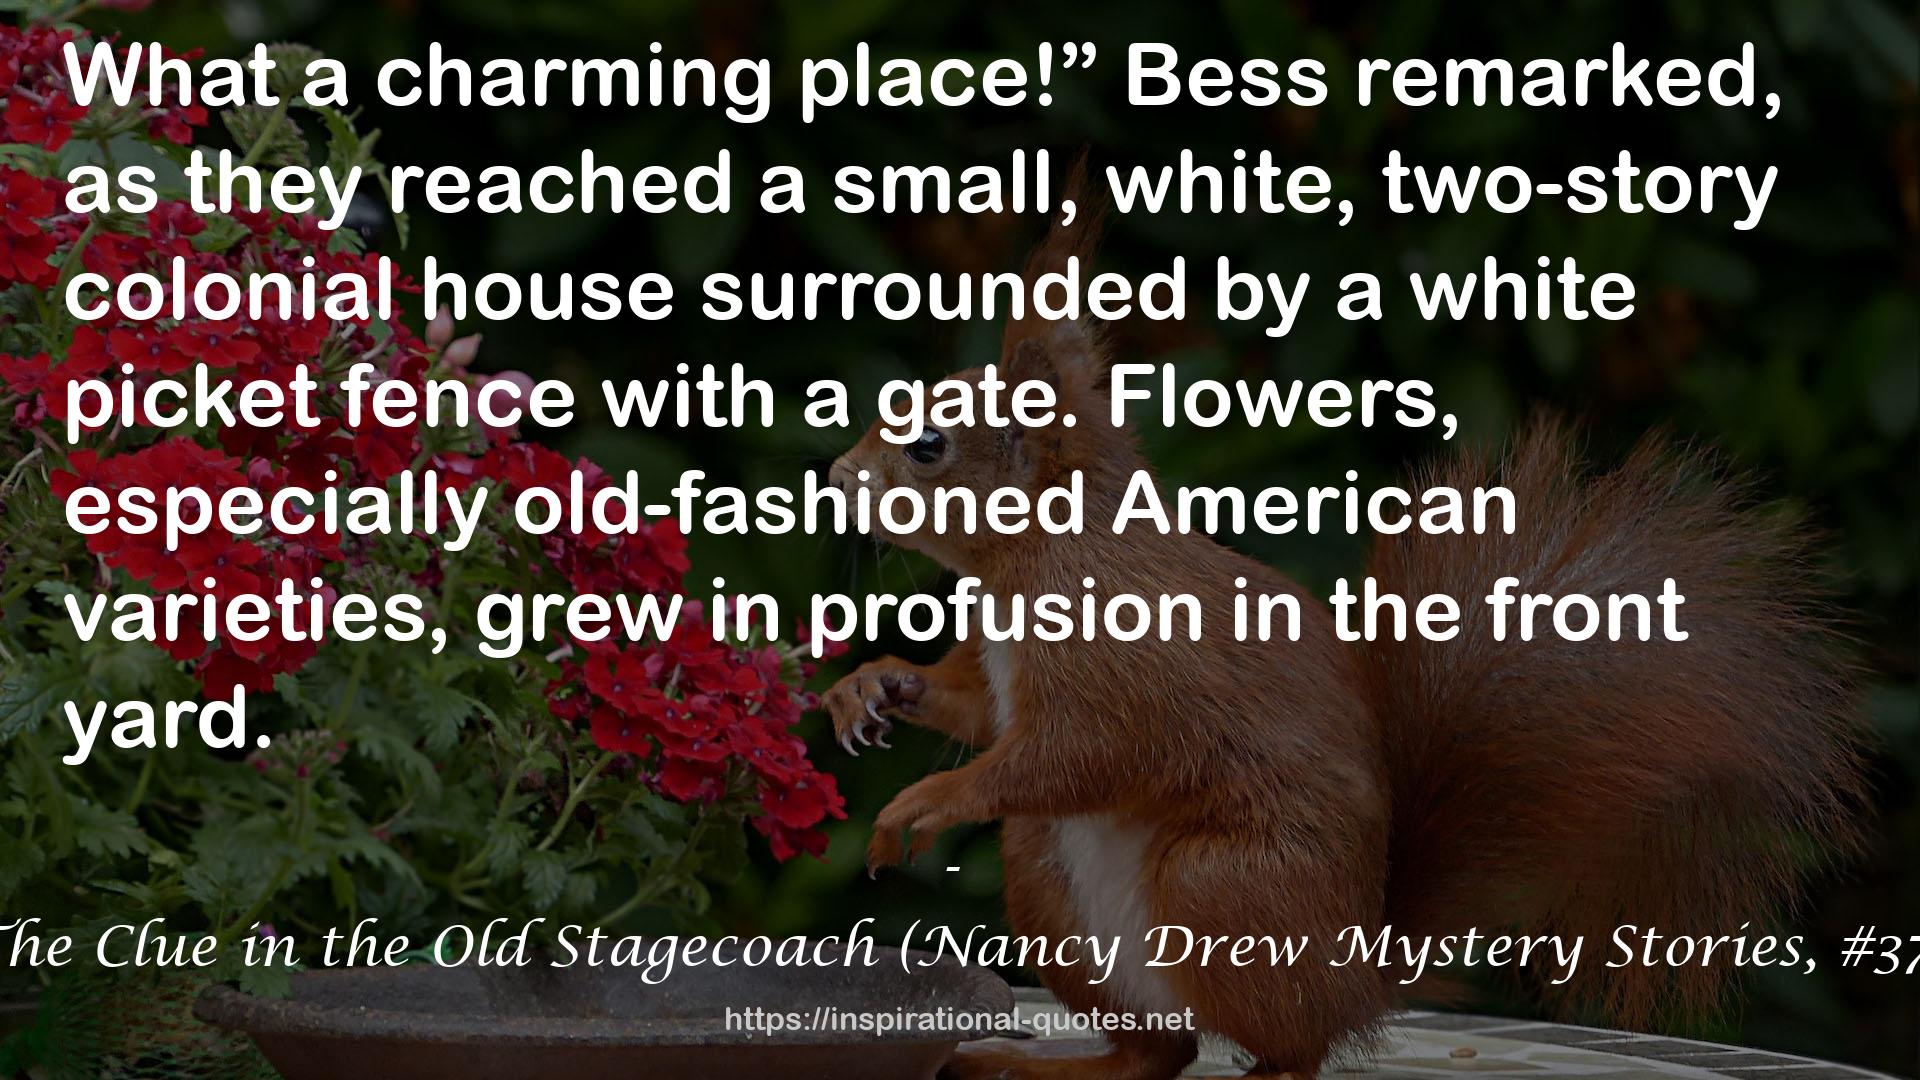 The Clue in the Old Stagecoach (Nancy Drew Mystery Stories, #37) QUOTES